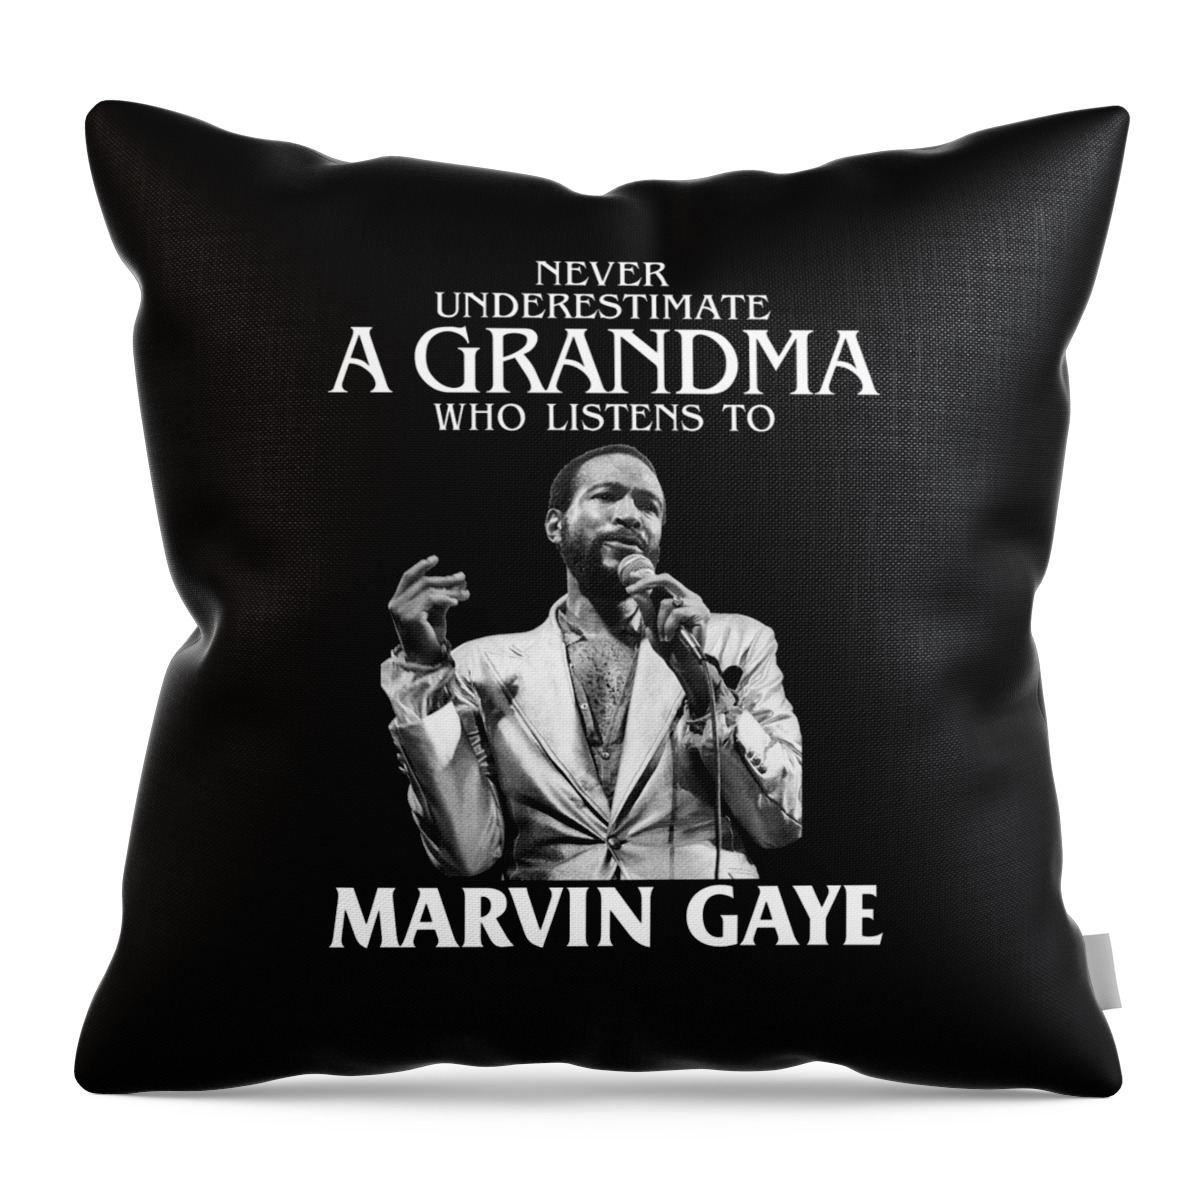 Marvin Gaye Throw Pillow featuring the digital art Funny Grandma Gift Who Listens to Marvin Gaye by Notorious Artist